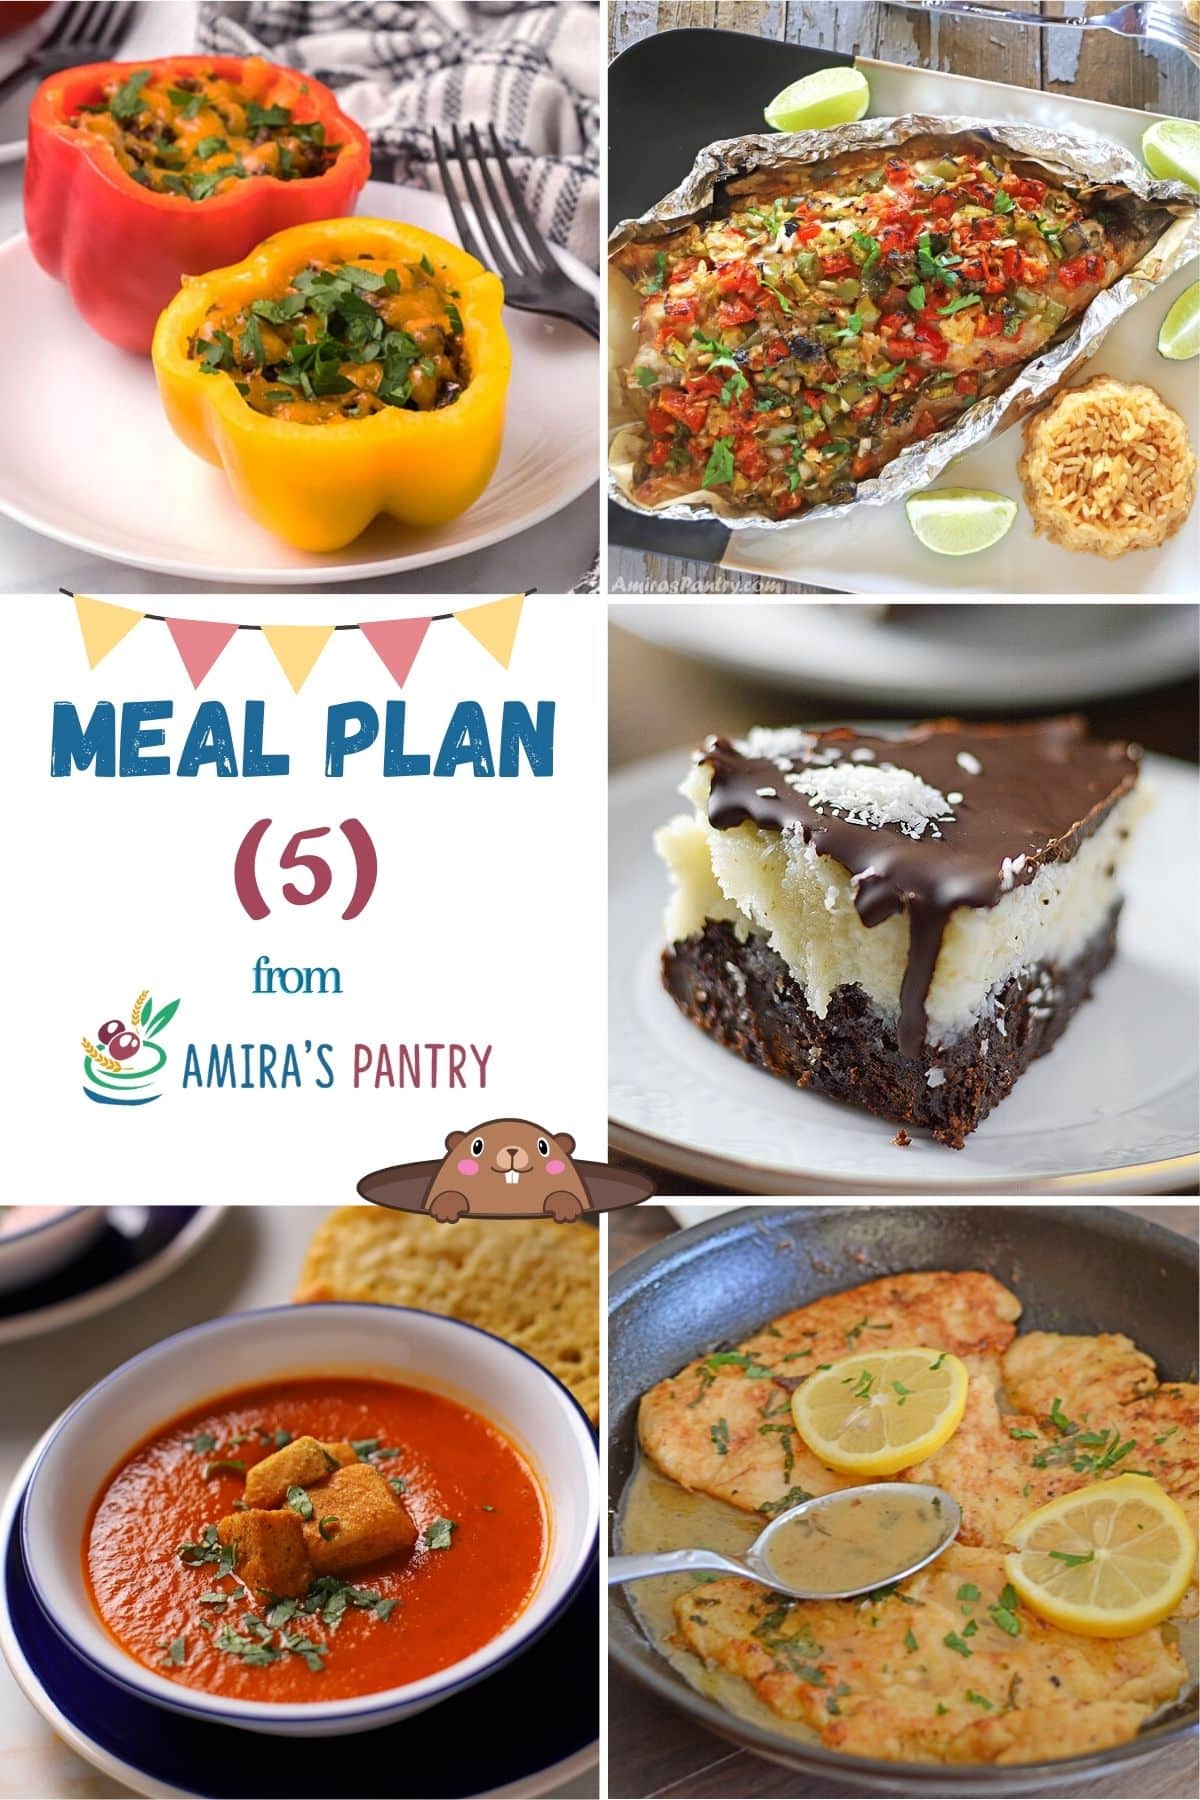 A collage of 5 images showing recipes from thsi week's meal plan.